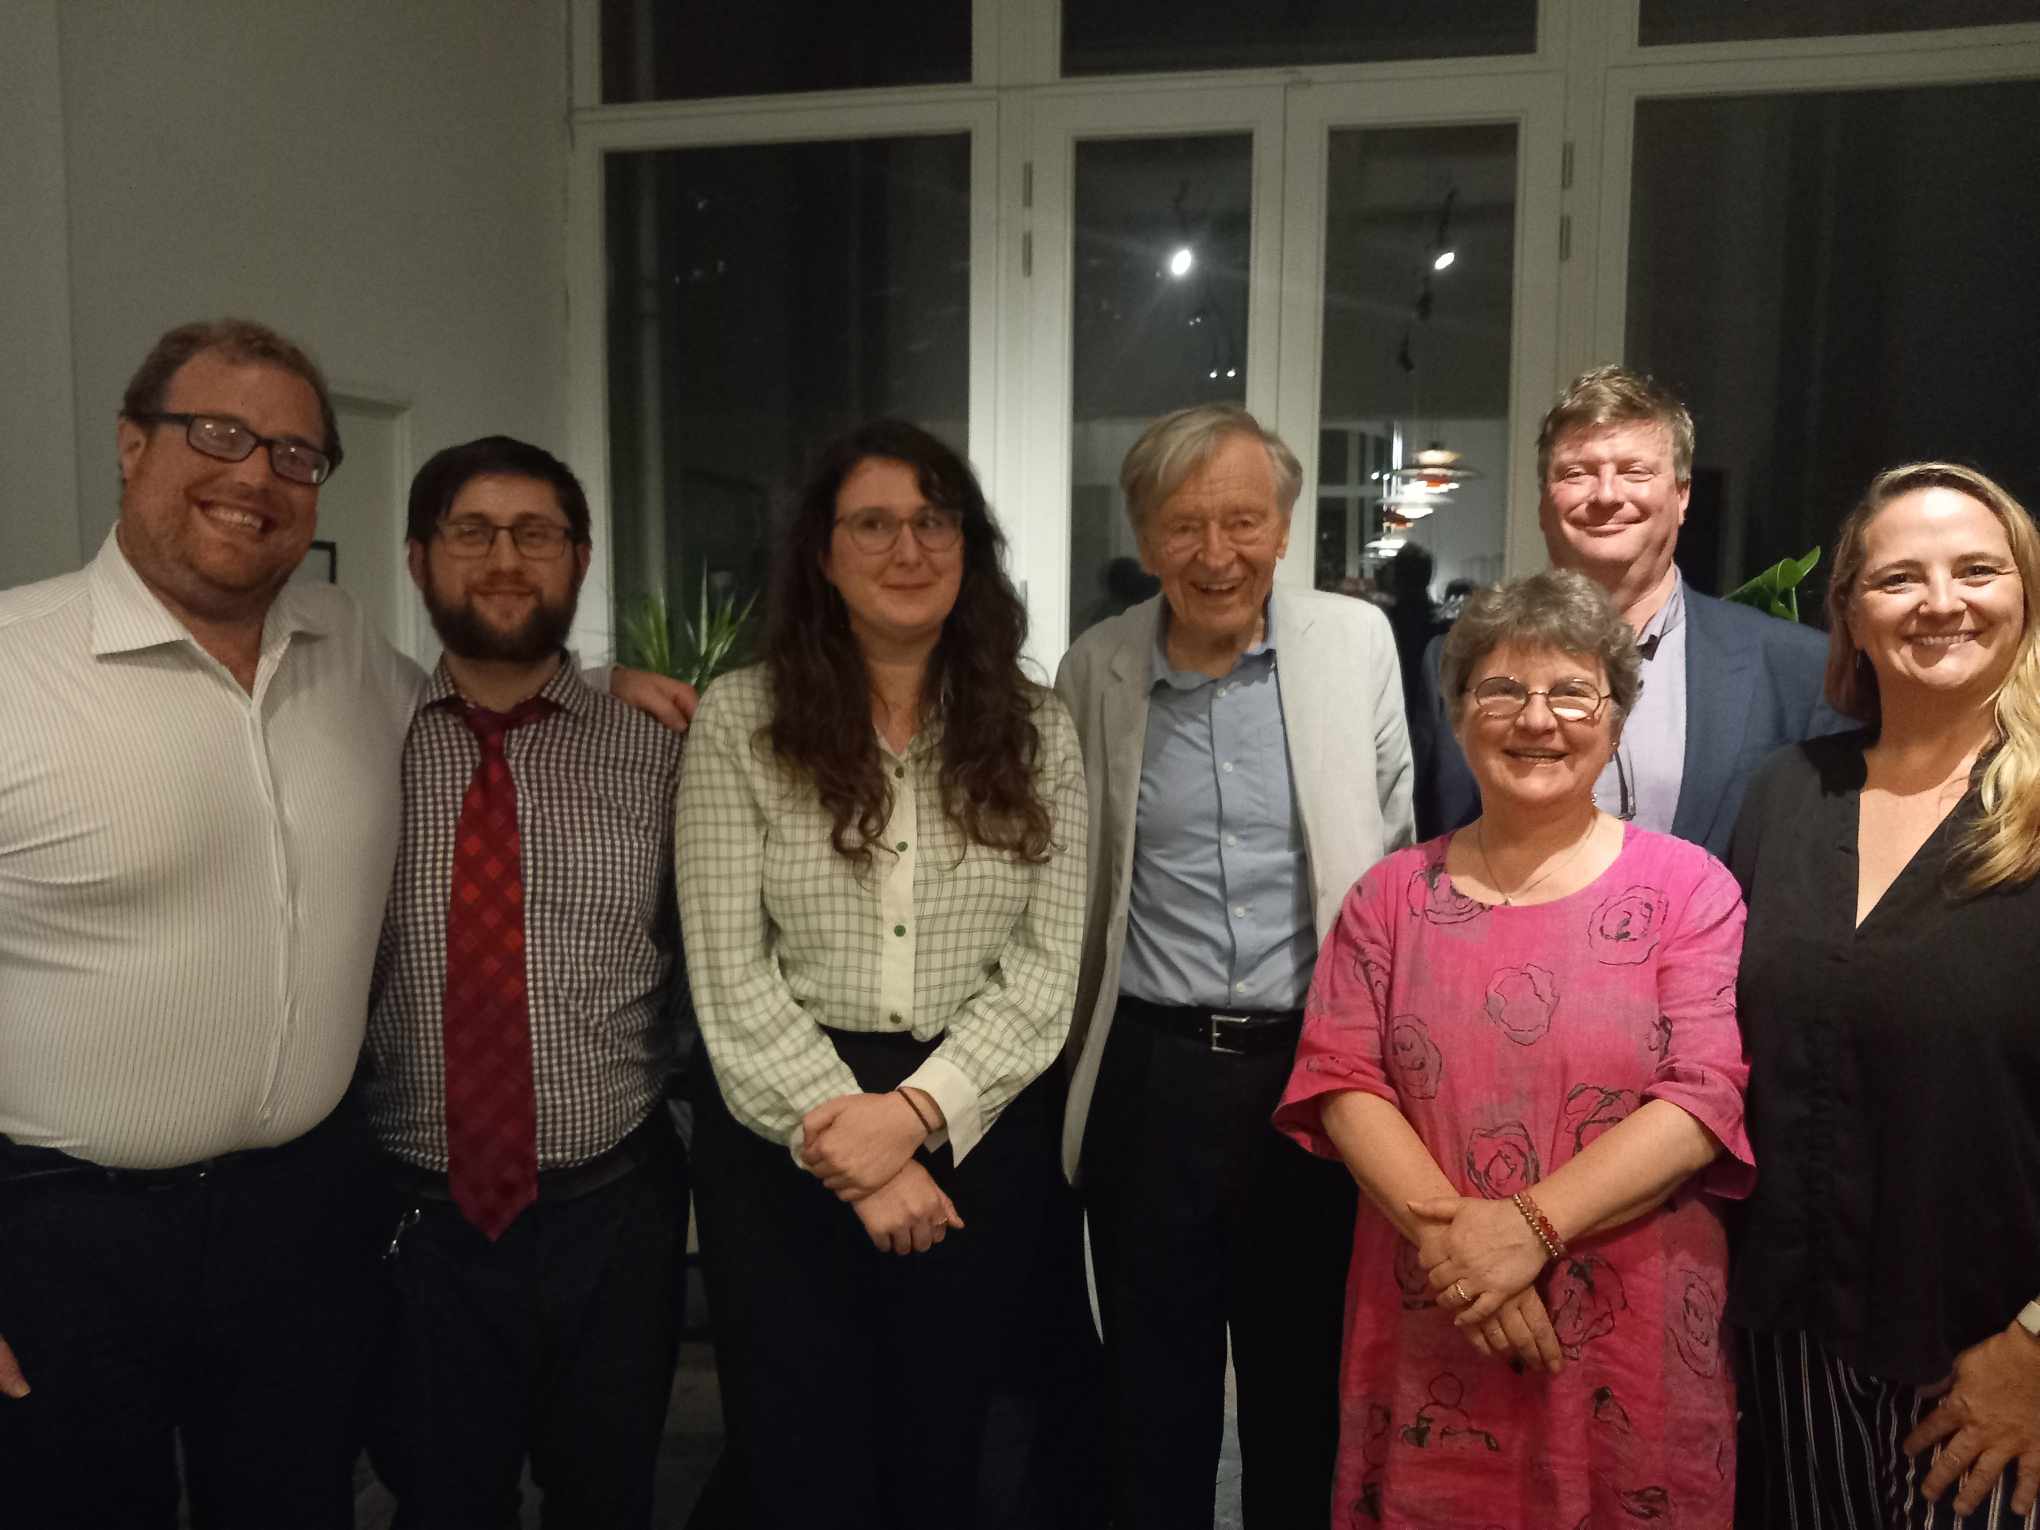 The executive committee with Lord Alf Dubs